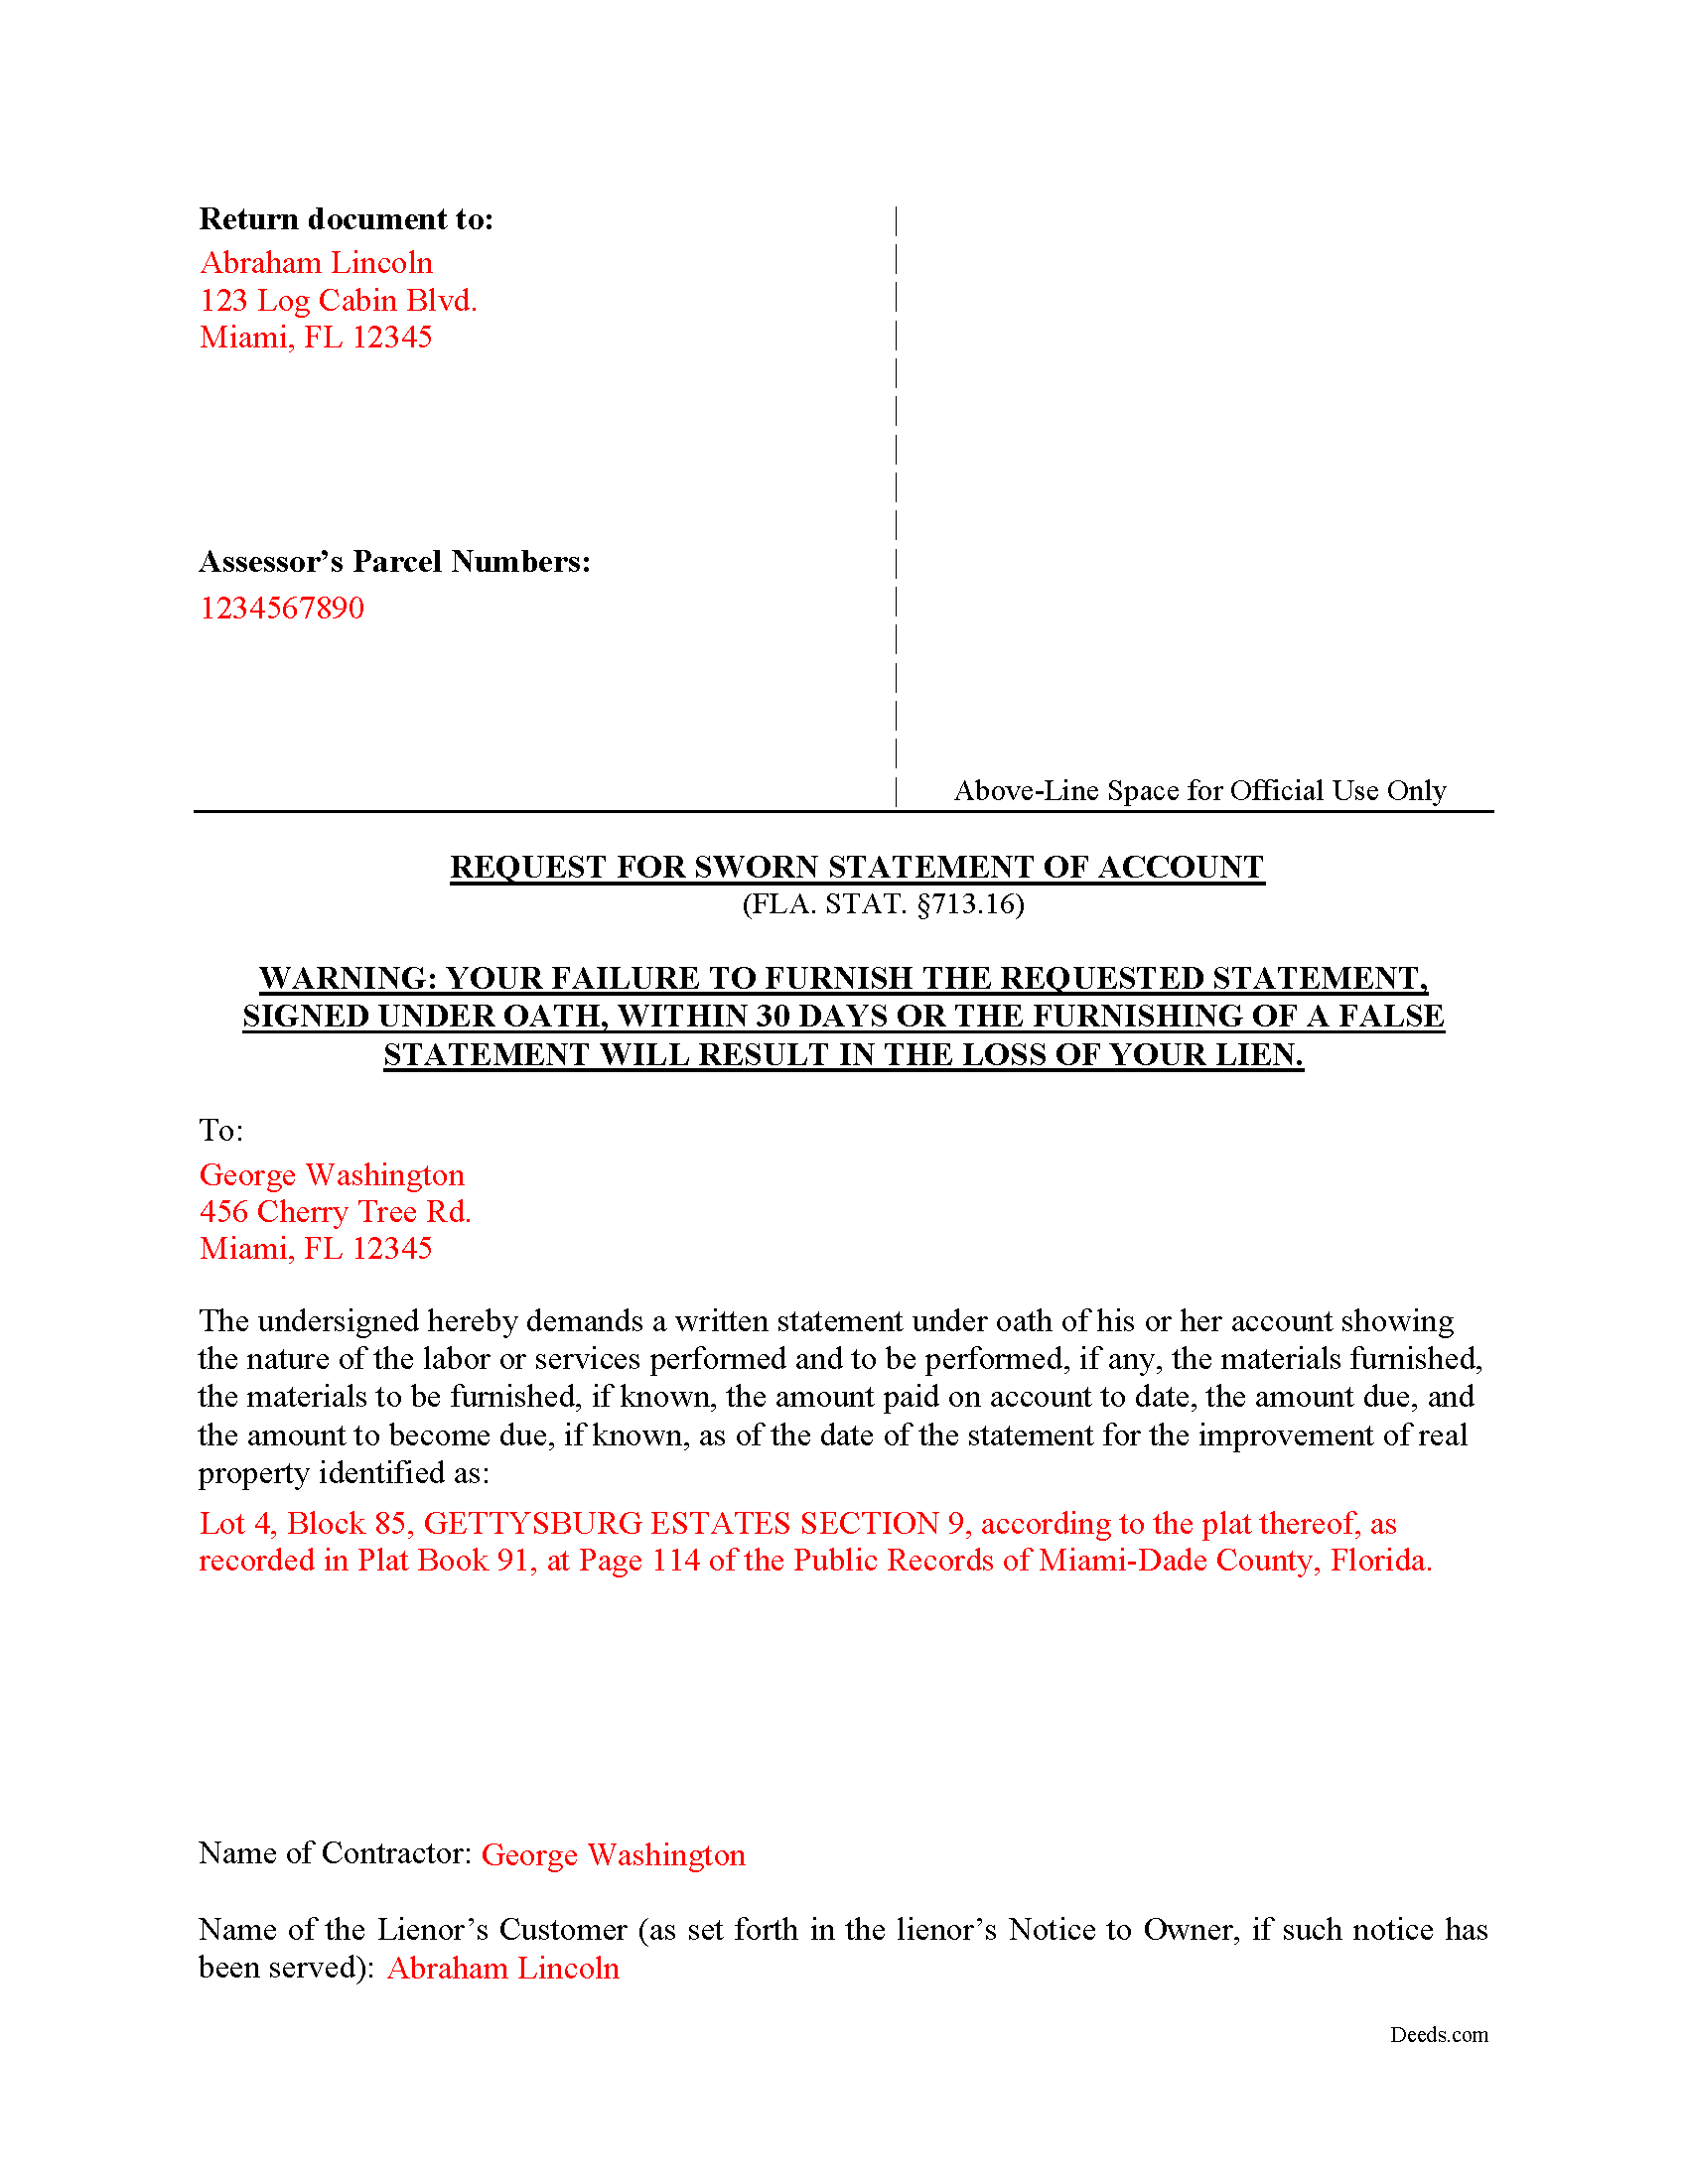 Completed Example of the Request for a Sworn Statement of Account Document